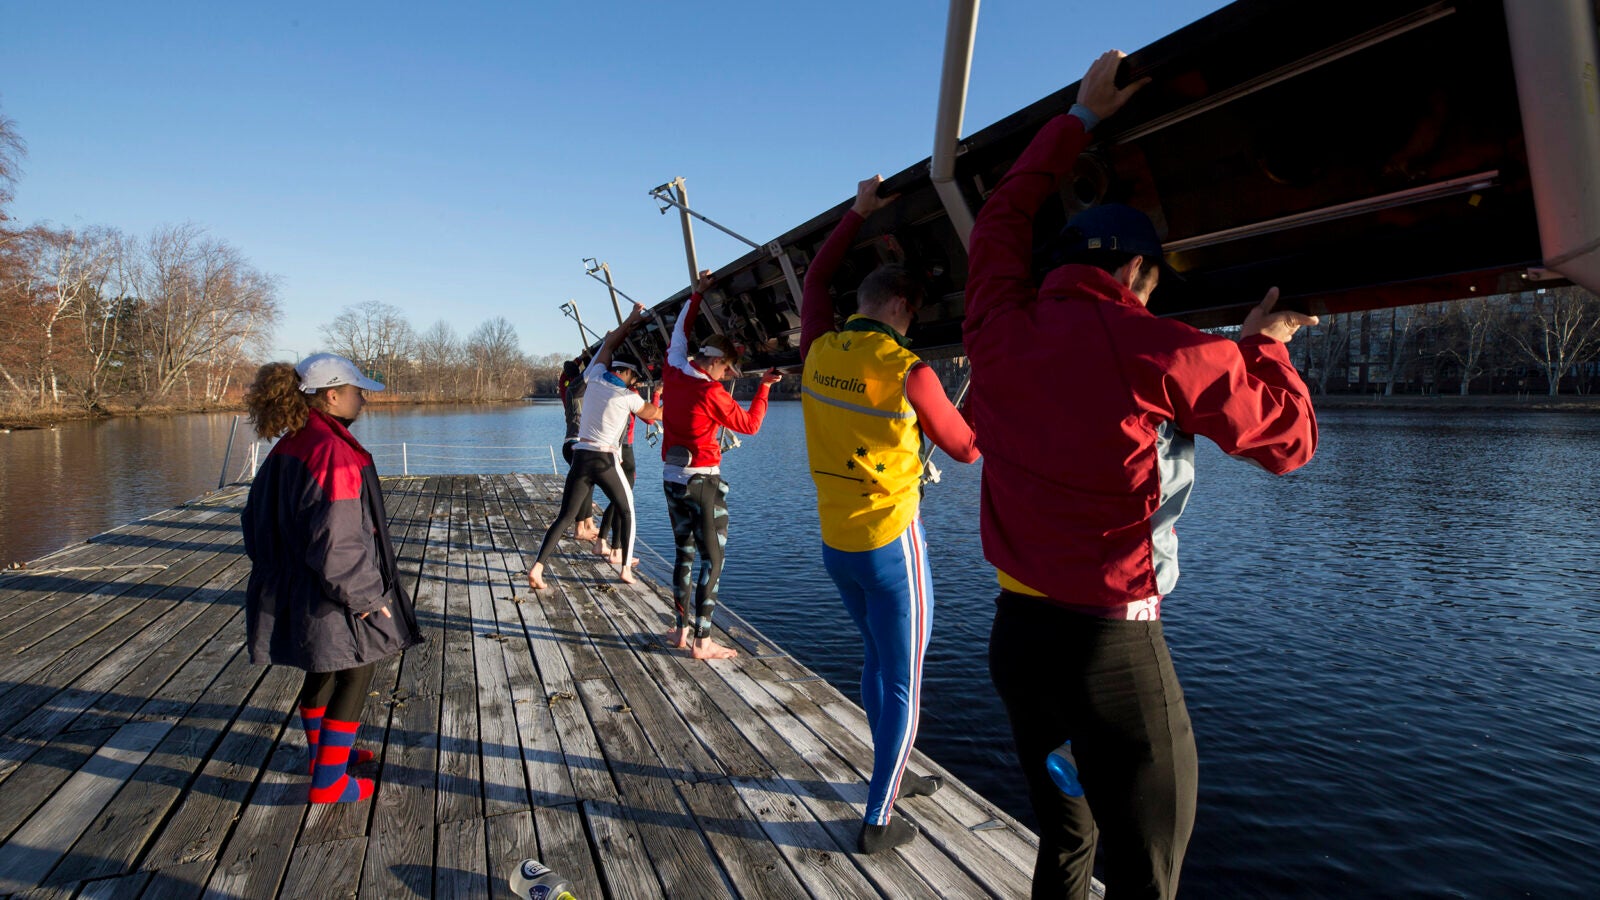 Jennie Kunes calls out instructions to her “eights” as they set their boat in the water. “One rower putting in more effort doesn’t make a measureable difference unless the entire crew does it with them, and the coxswain has to be attuned to the crew’s mentality and technique to keep everyone together.”